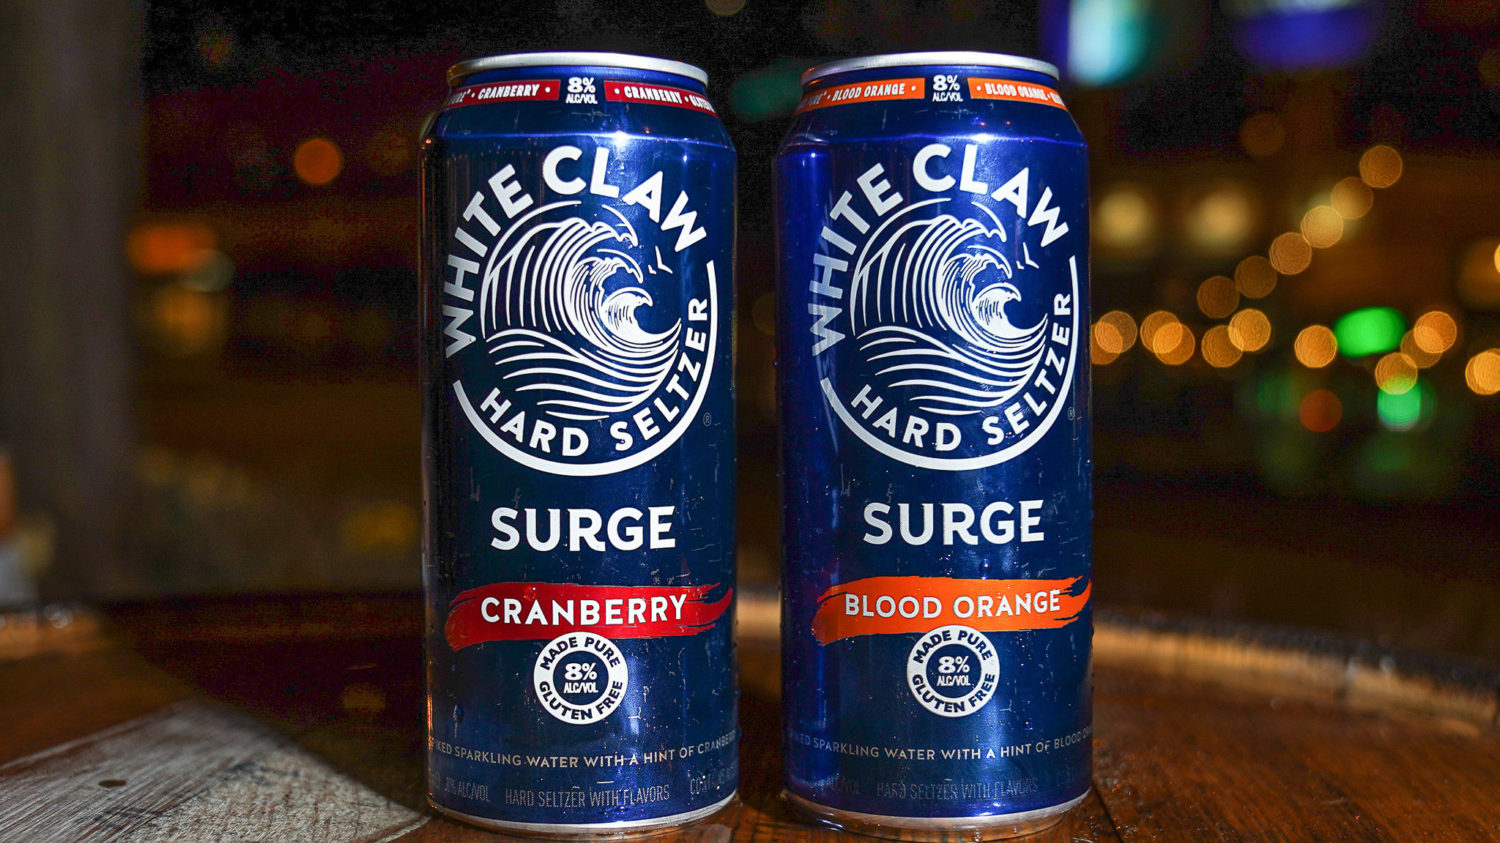 White Claw Surge hard seltzer cans